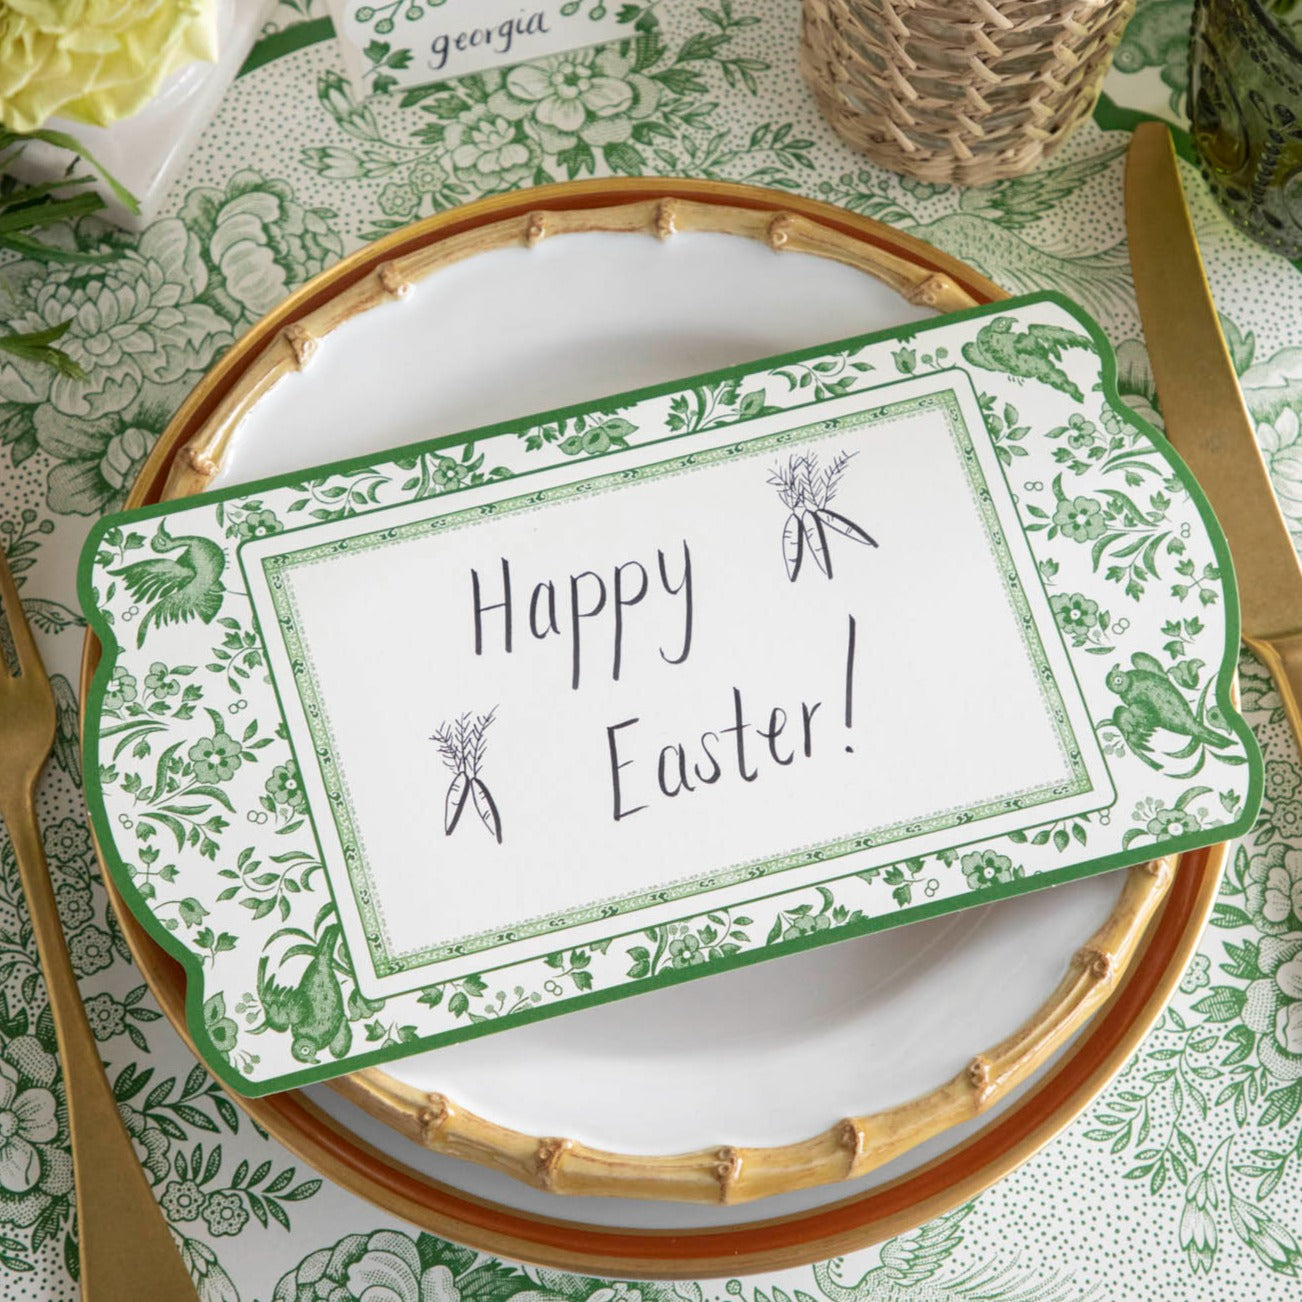 A Green Regal Peacock Table Card with &quot;Happy Easter!&quot; written on it resting on the plate of an elegant place setting.